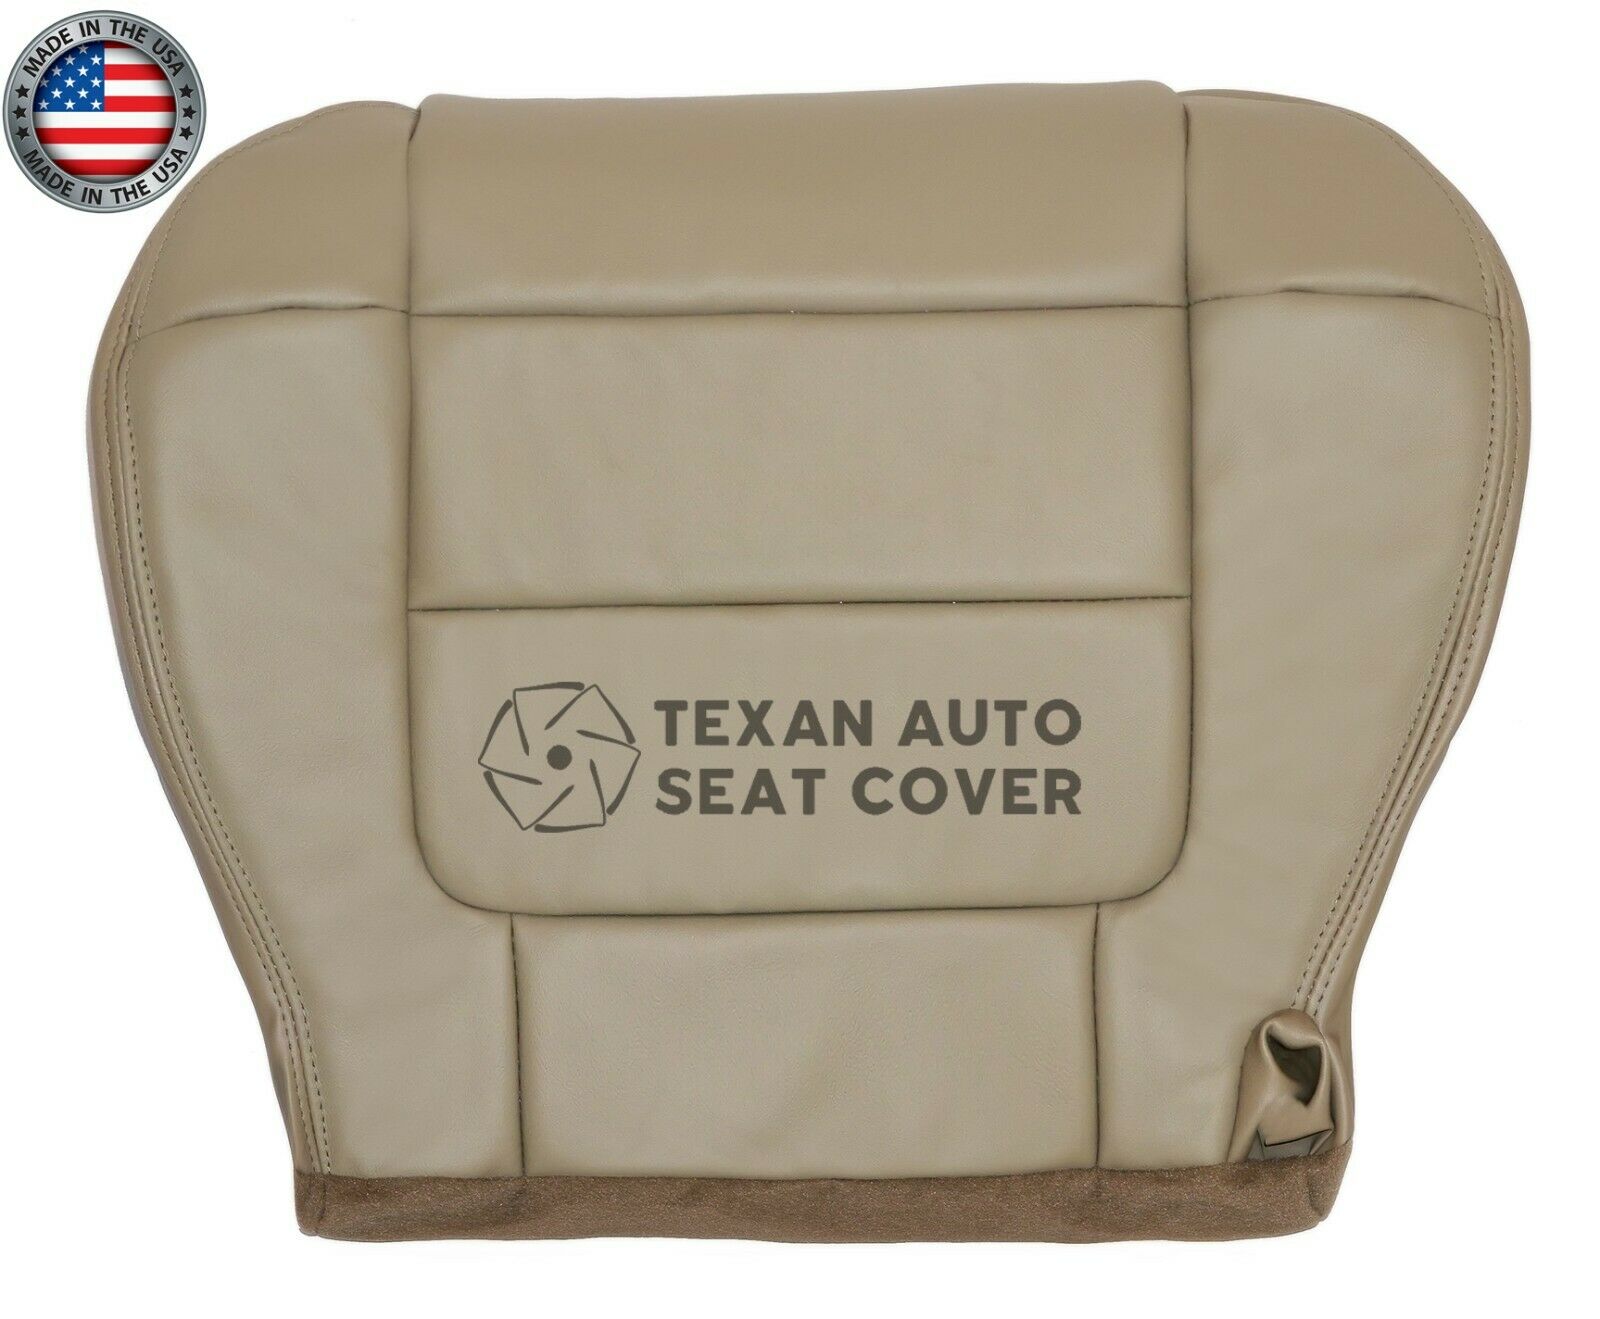 2001, 2002 Ford F150 Lariat Passenger Bottom Leather Seat Cover Tan